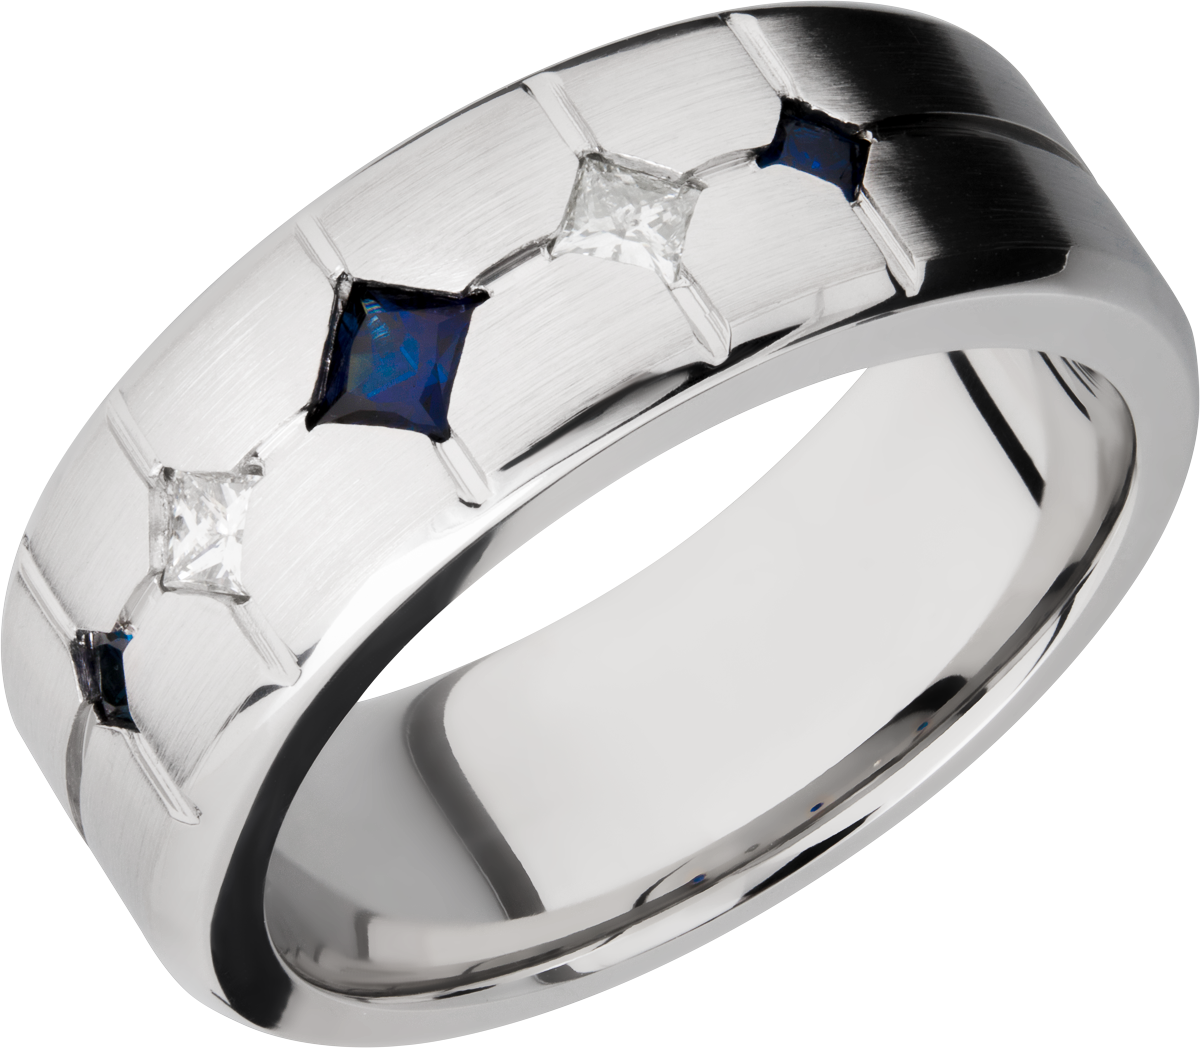 cobalt chrome 8mm beveled edge band with 3 sapphires and 2 diamonds set Onpoint/kite set on the top